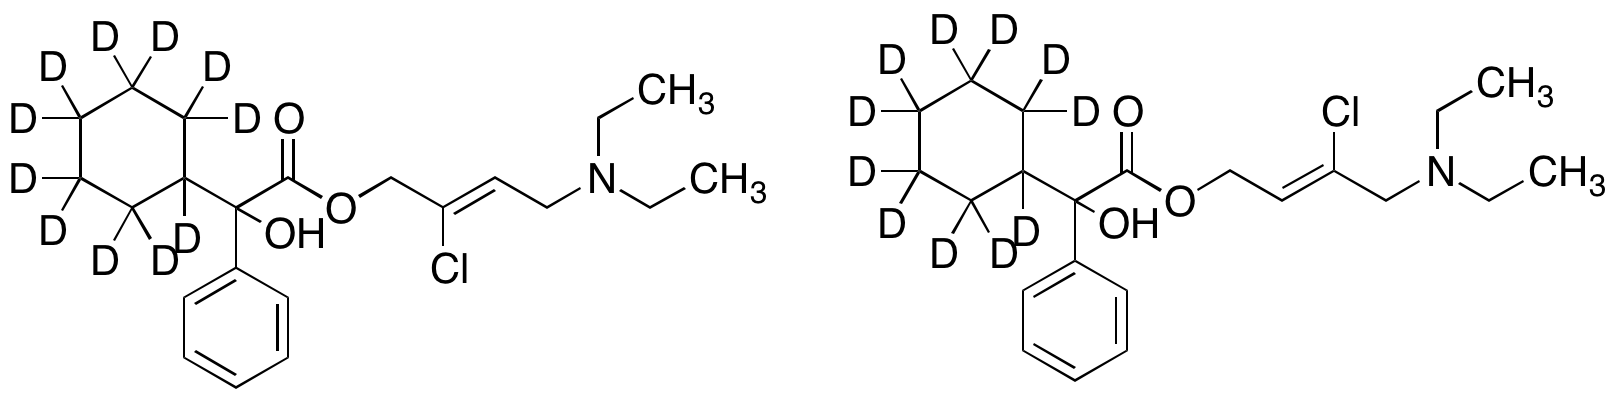 Mixture of (Z)-3-chloro-Oxybutynin-d11 and (Z)-2-chloro-Oxybutynin-d11(Oxybutynin HCI Adduct Impurity)